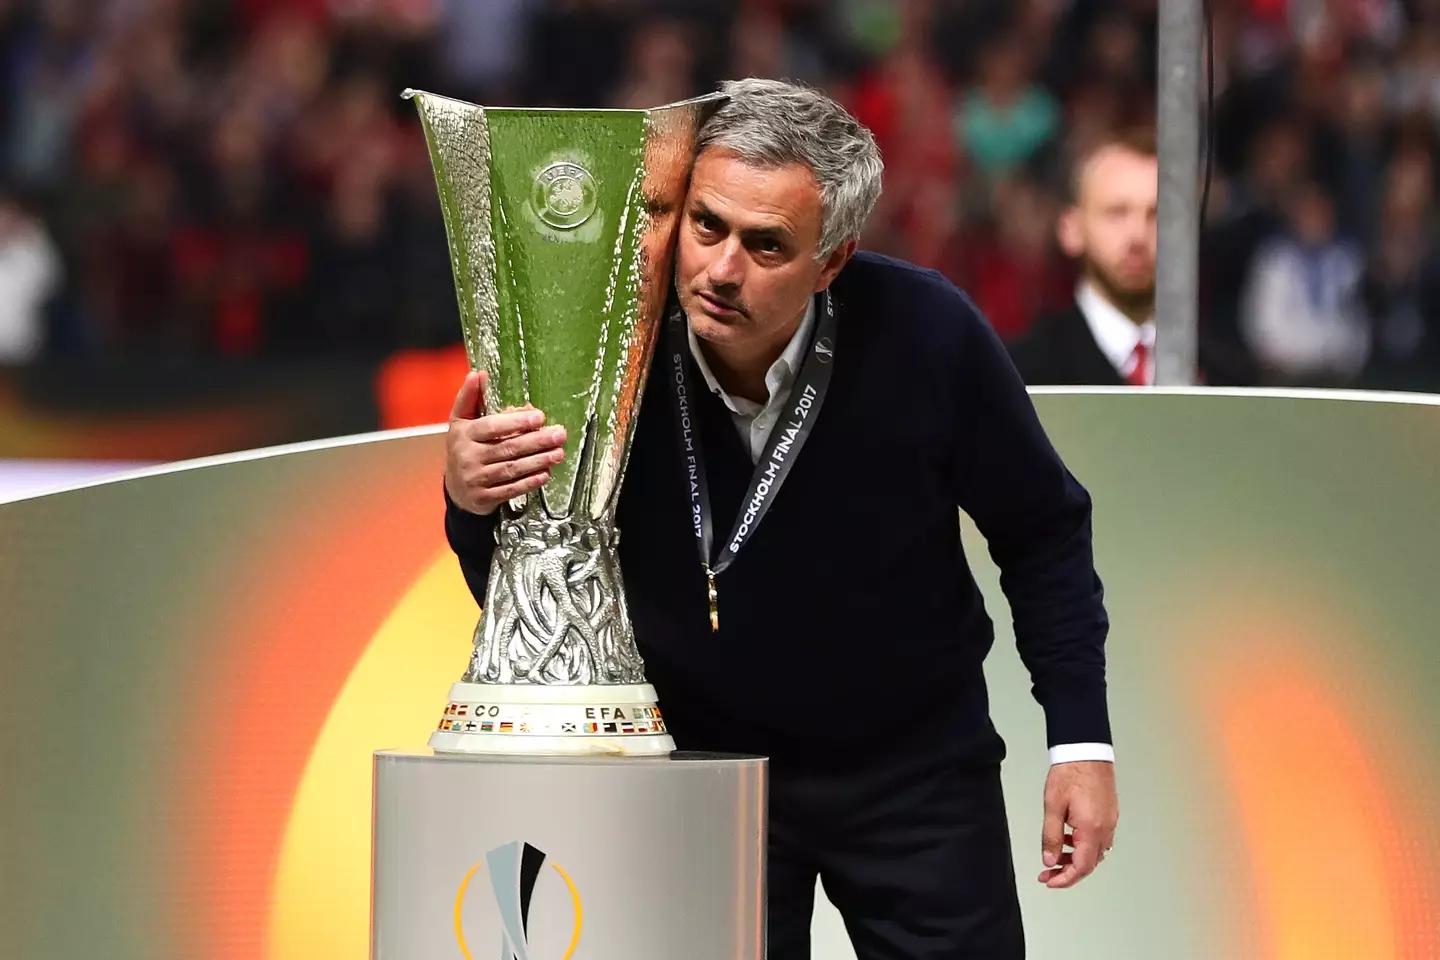 Jose Mourinho celebrates winning the Europa League with Manchester United. Image: Getty 